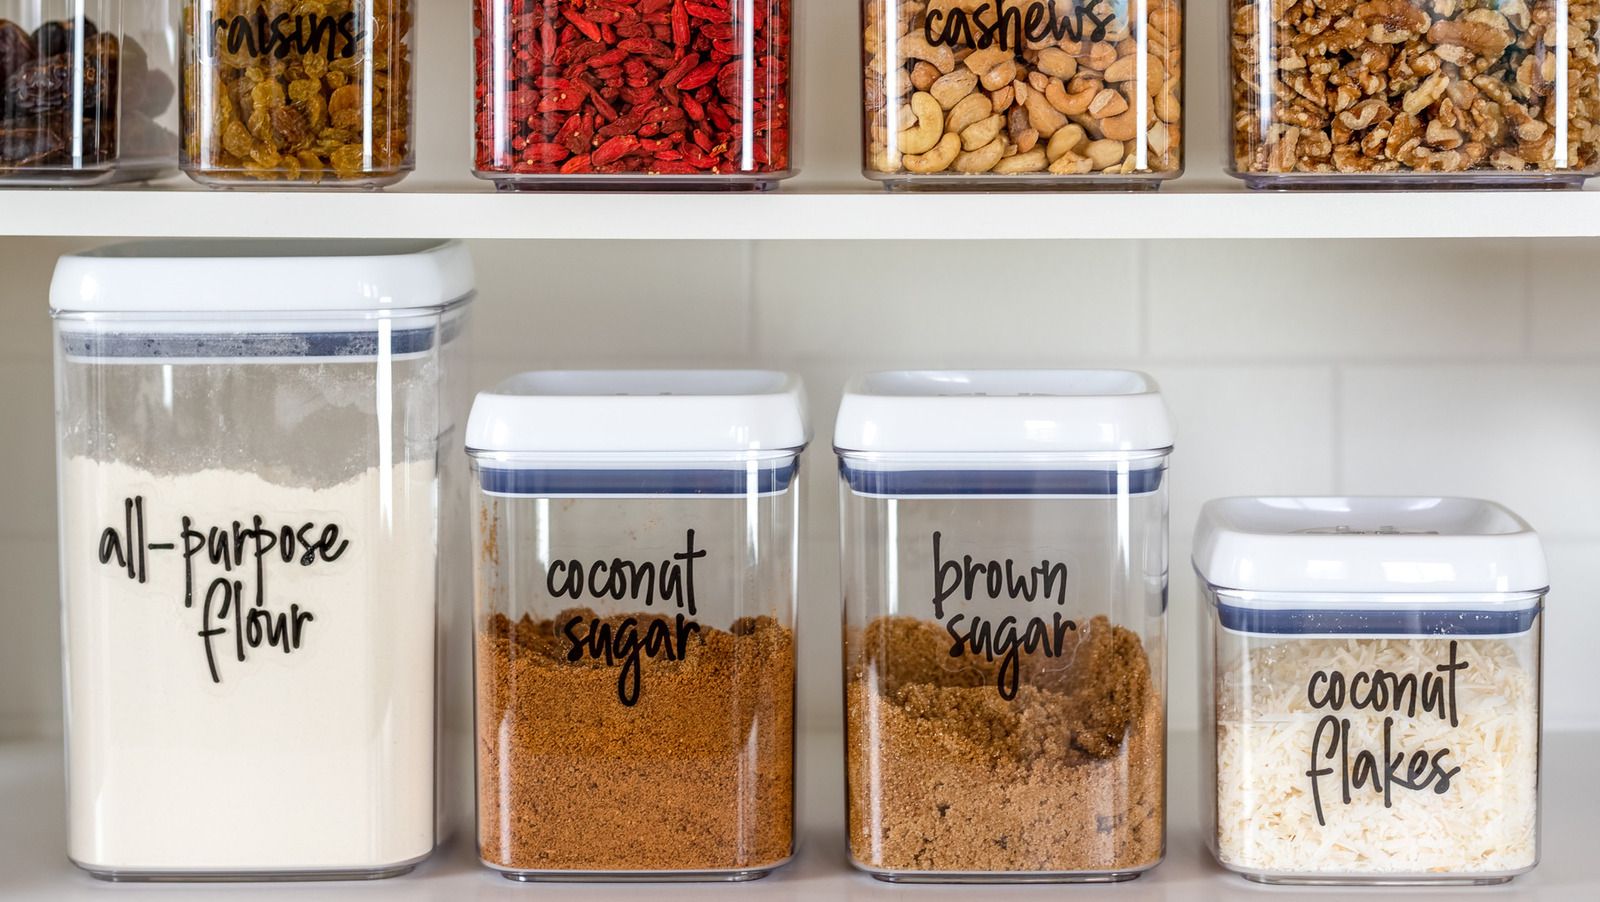 Should You Really Decant Every Pantry Item Into Storage Containers